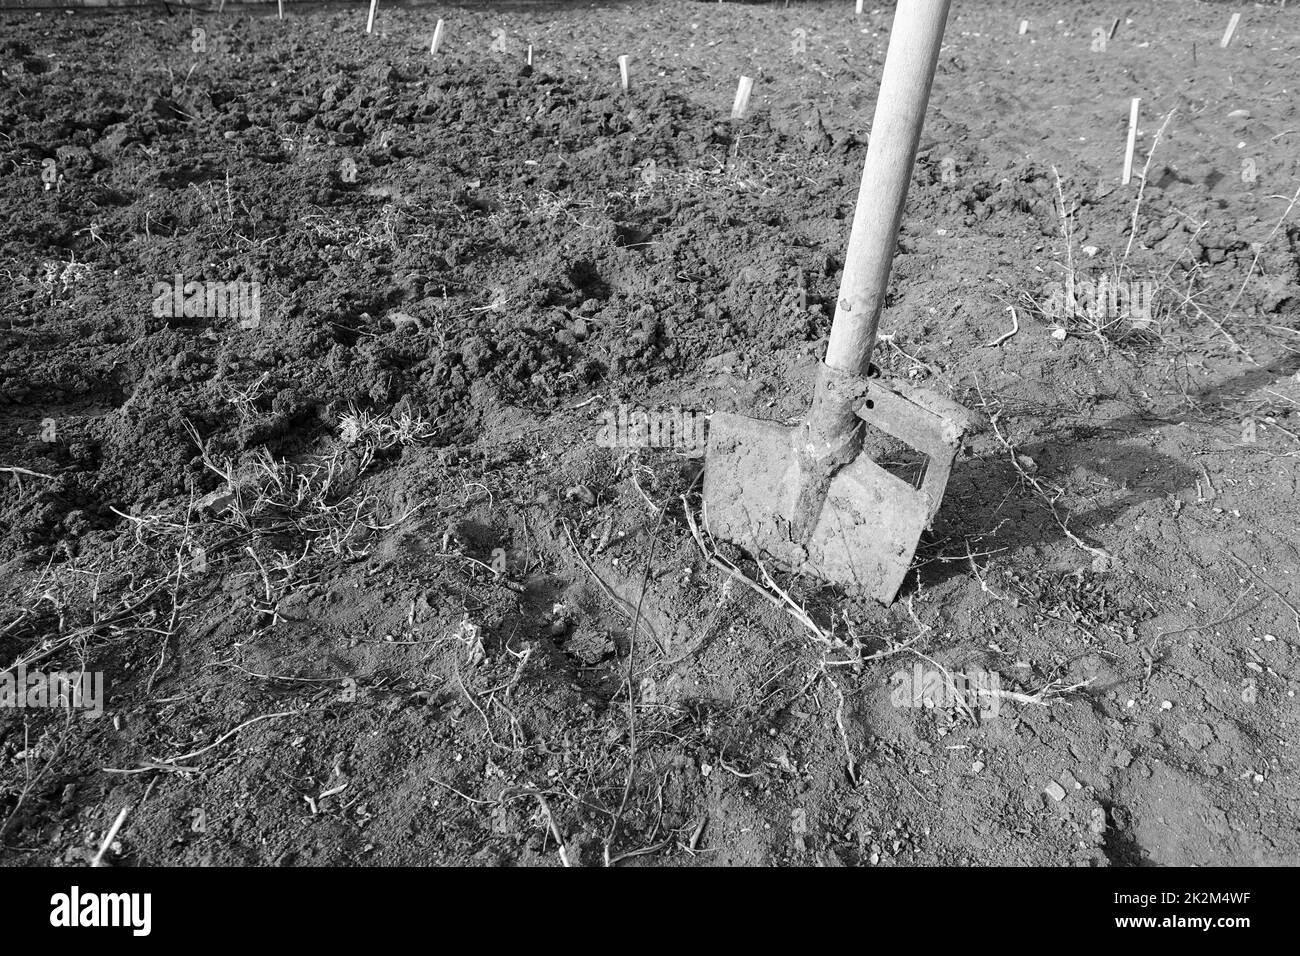 soil preparation for planting in spring, hoeing with a digging shovel Stock Photo